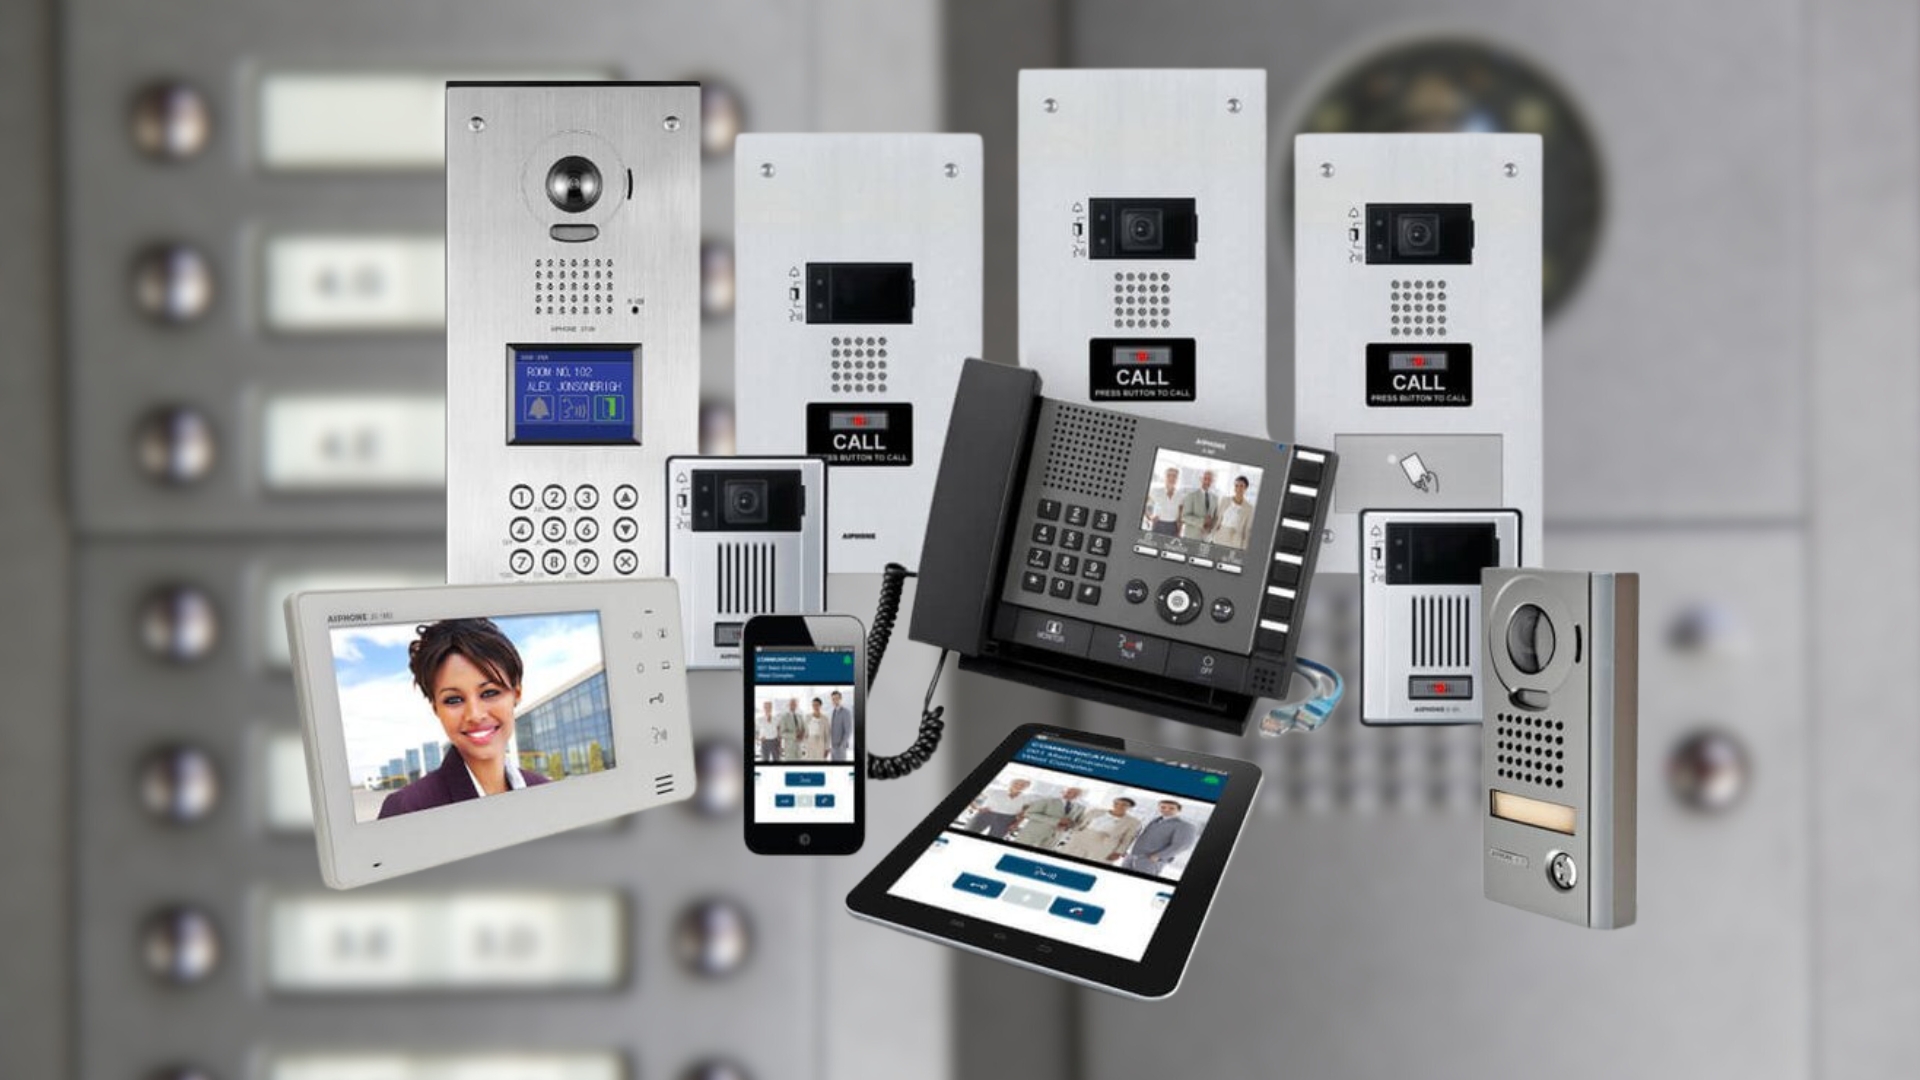 Some types of home intercom systems